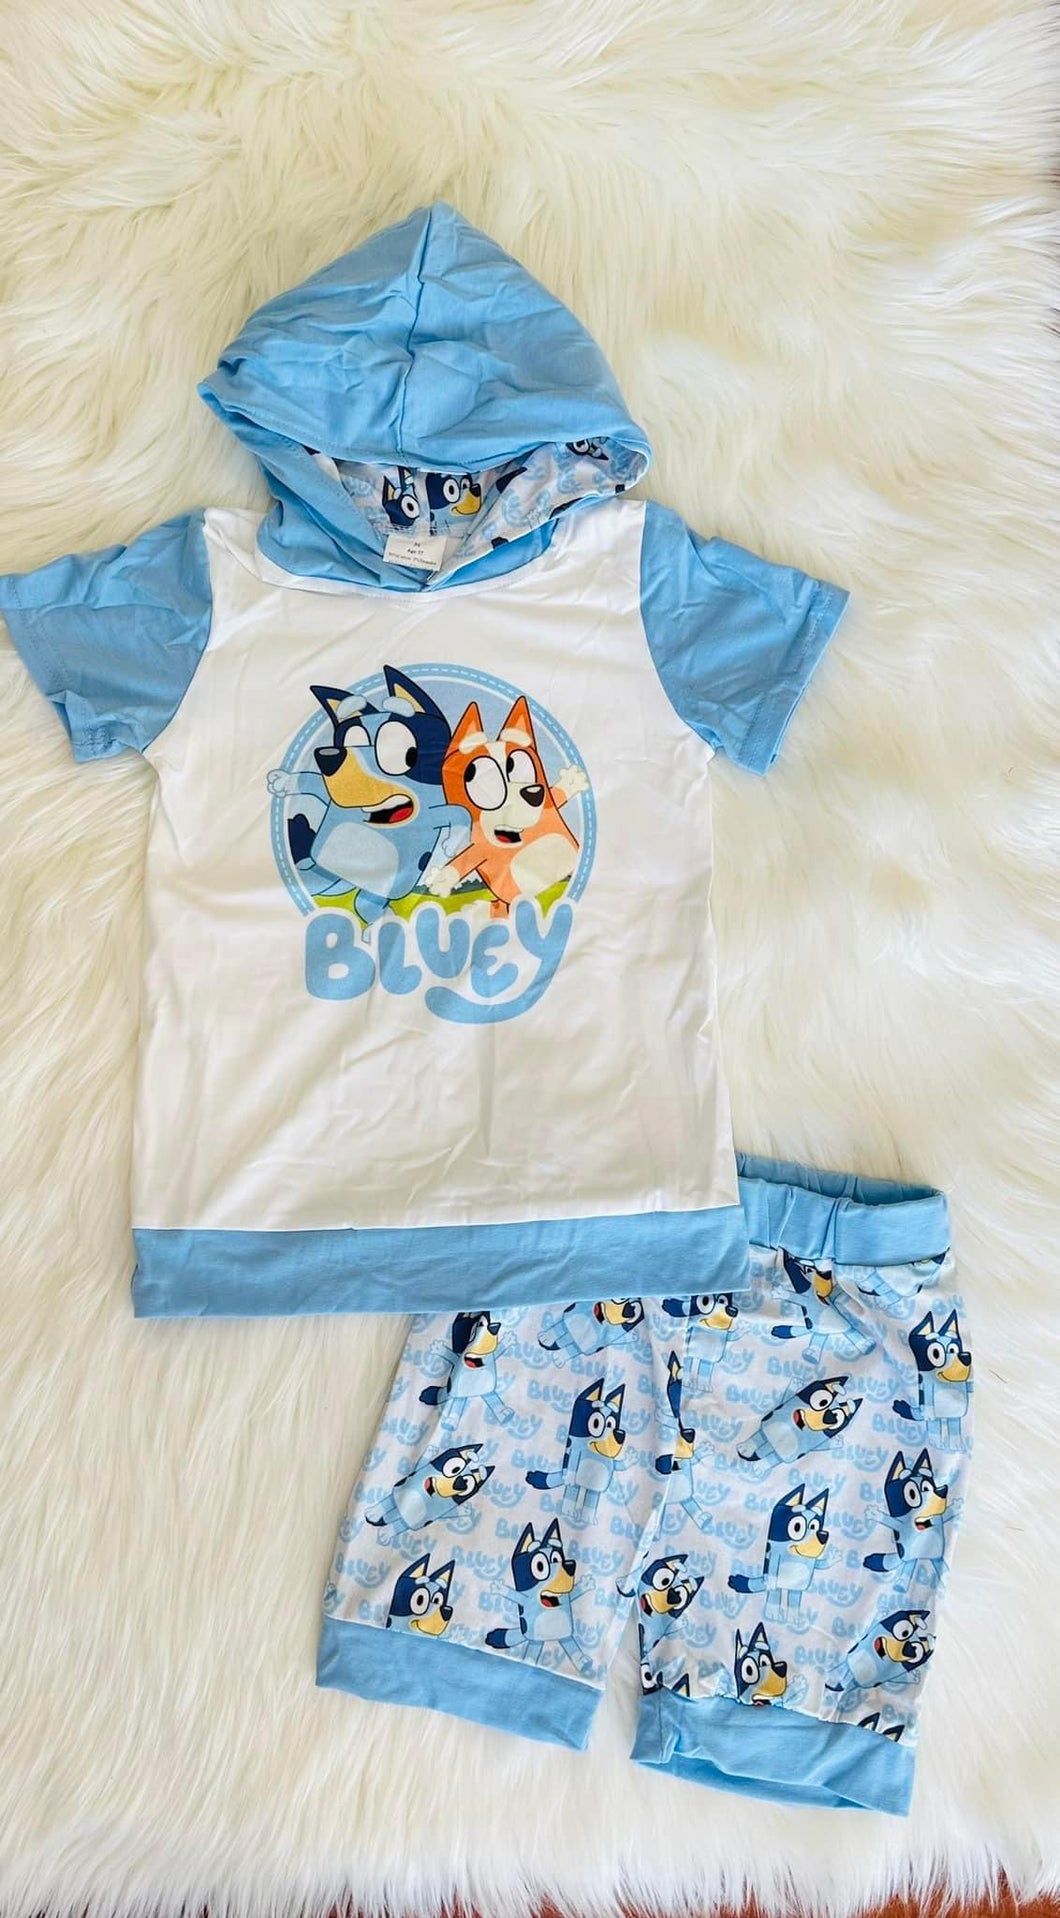 Bluey Outfit